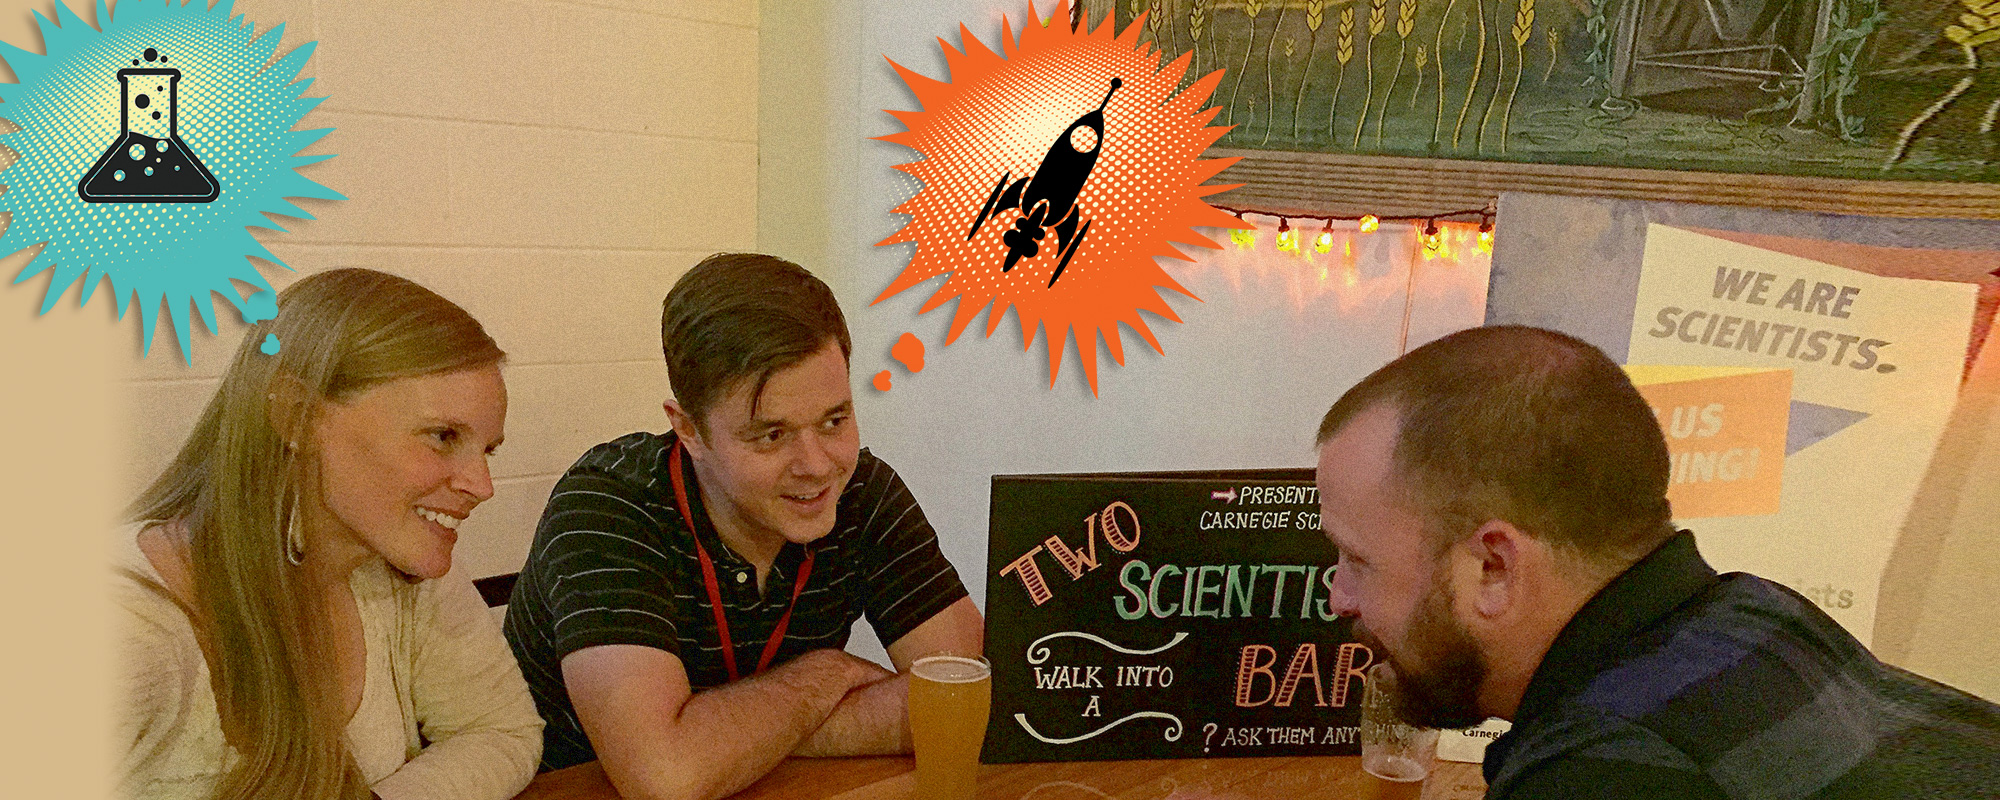 Two scientists talking to a man. THe scientists have cartoon thought bubbles above their heads depicting a rocket ship and a beaker.